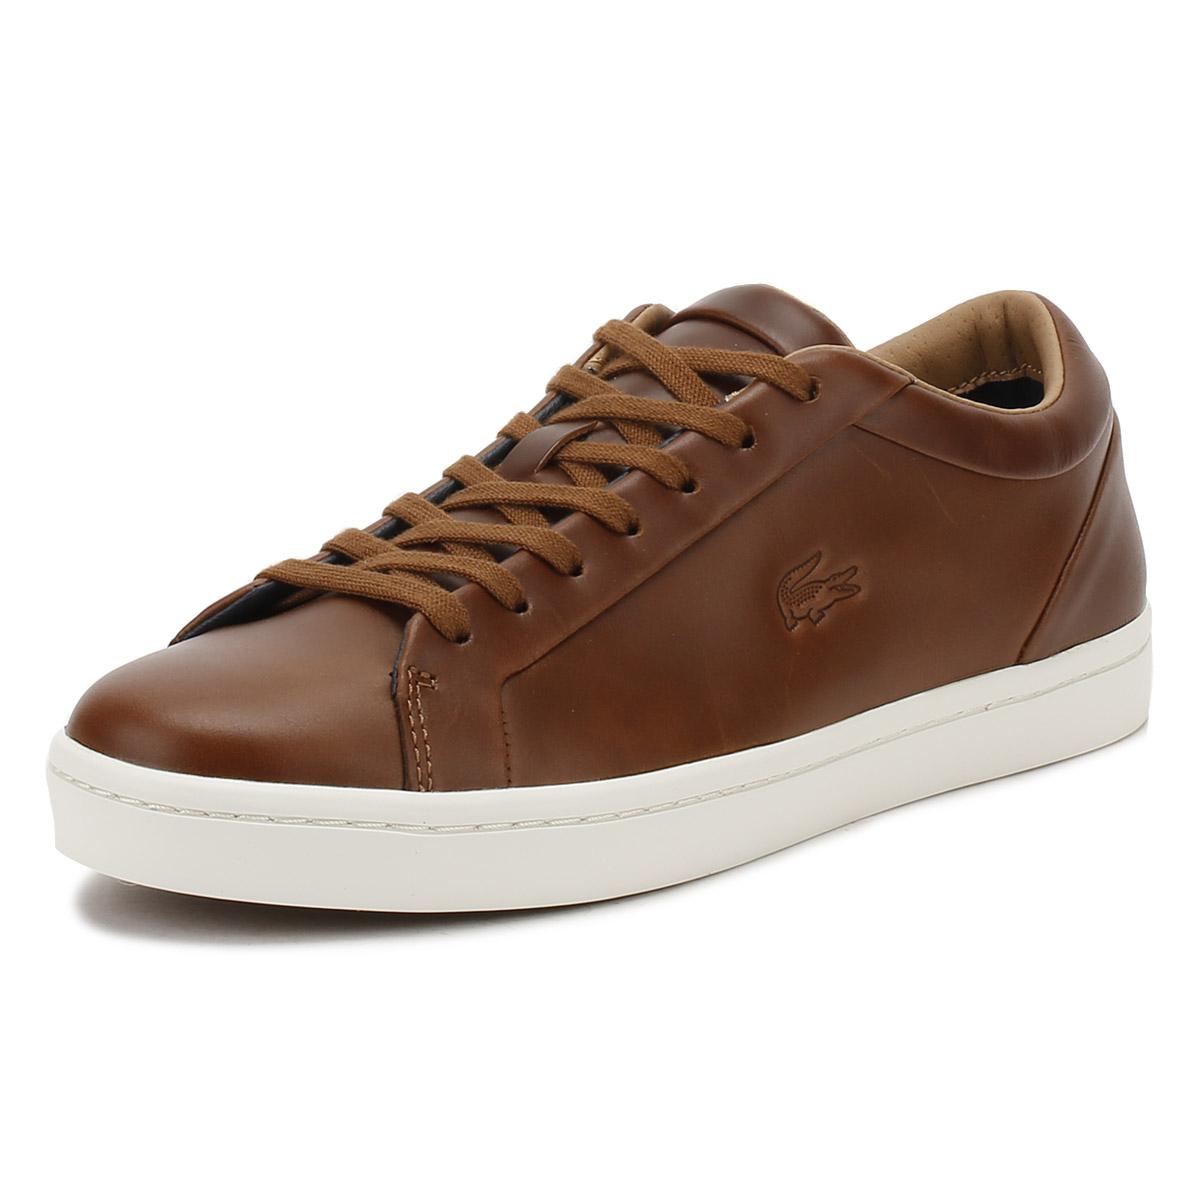 Lyst - Lacoste Mens Brown Straightset 317 1 Trainers in Brown for Men